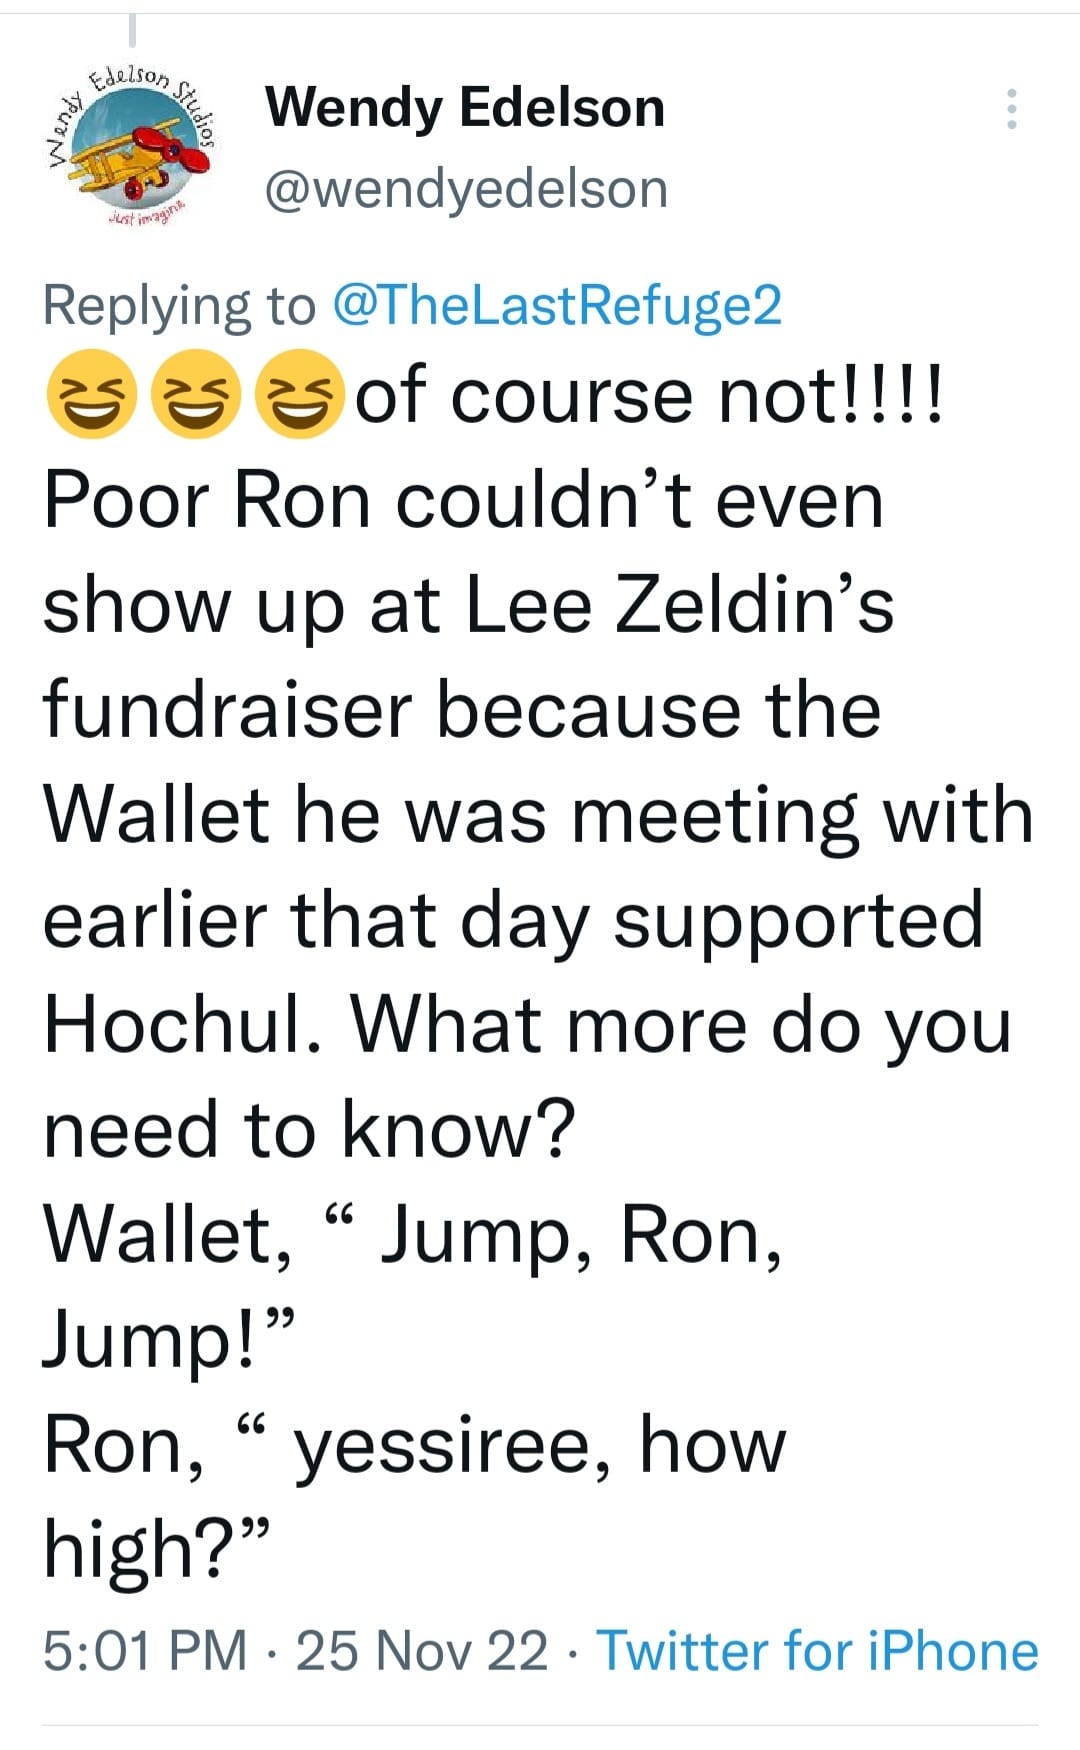 May be an image of one or more people and text that says 'ይልህ Edelson Stder Wendy Edelson Jutipnga @wendyedelson Replying to @TheLastRefuge2 of course not!!!! Poor Ron couldn't even show up at Lee Zeldin's fundraiser because the Wallet he was meeting with earlier that day supported Hochul. What more do you need to know? Wallet, Jump, Ron, Jump!" Ron, yessiree, how high?" 5:01 PM 25 Nov 22 Twitter for iPhone'